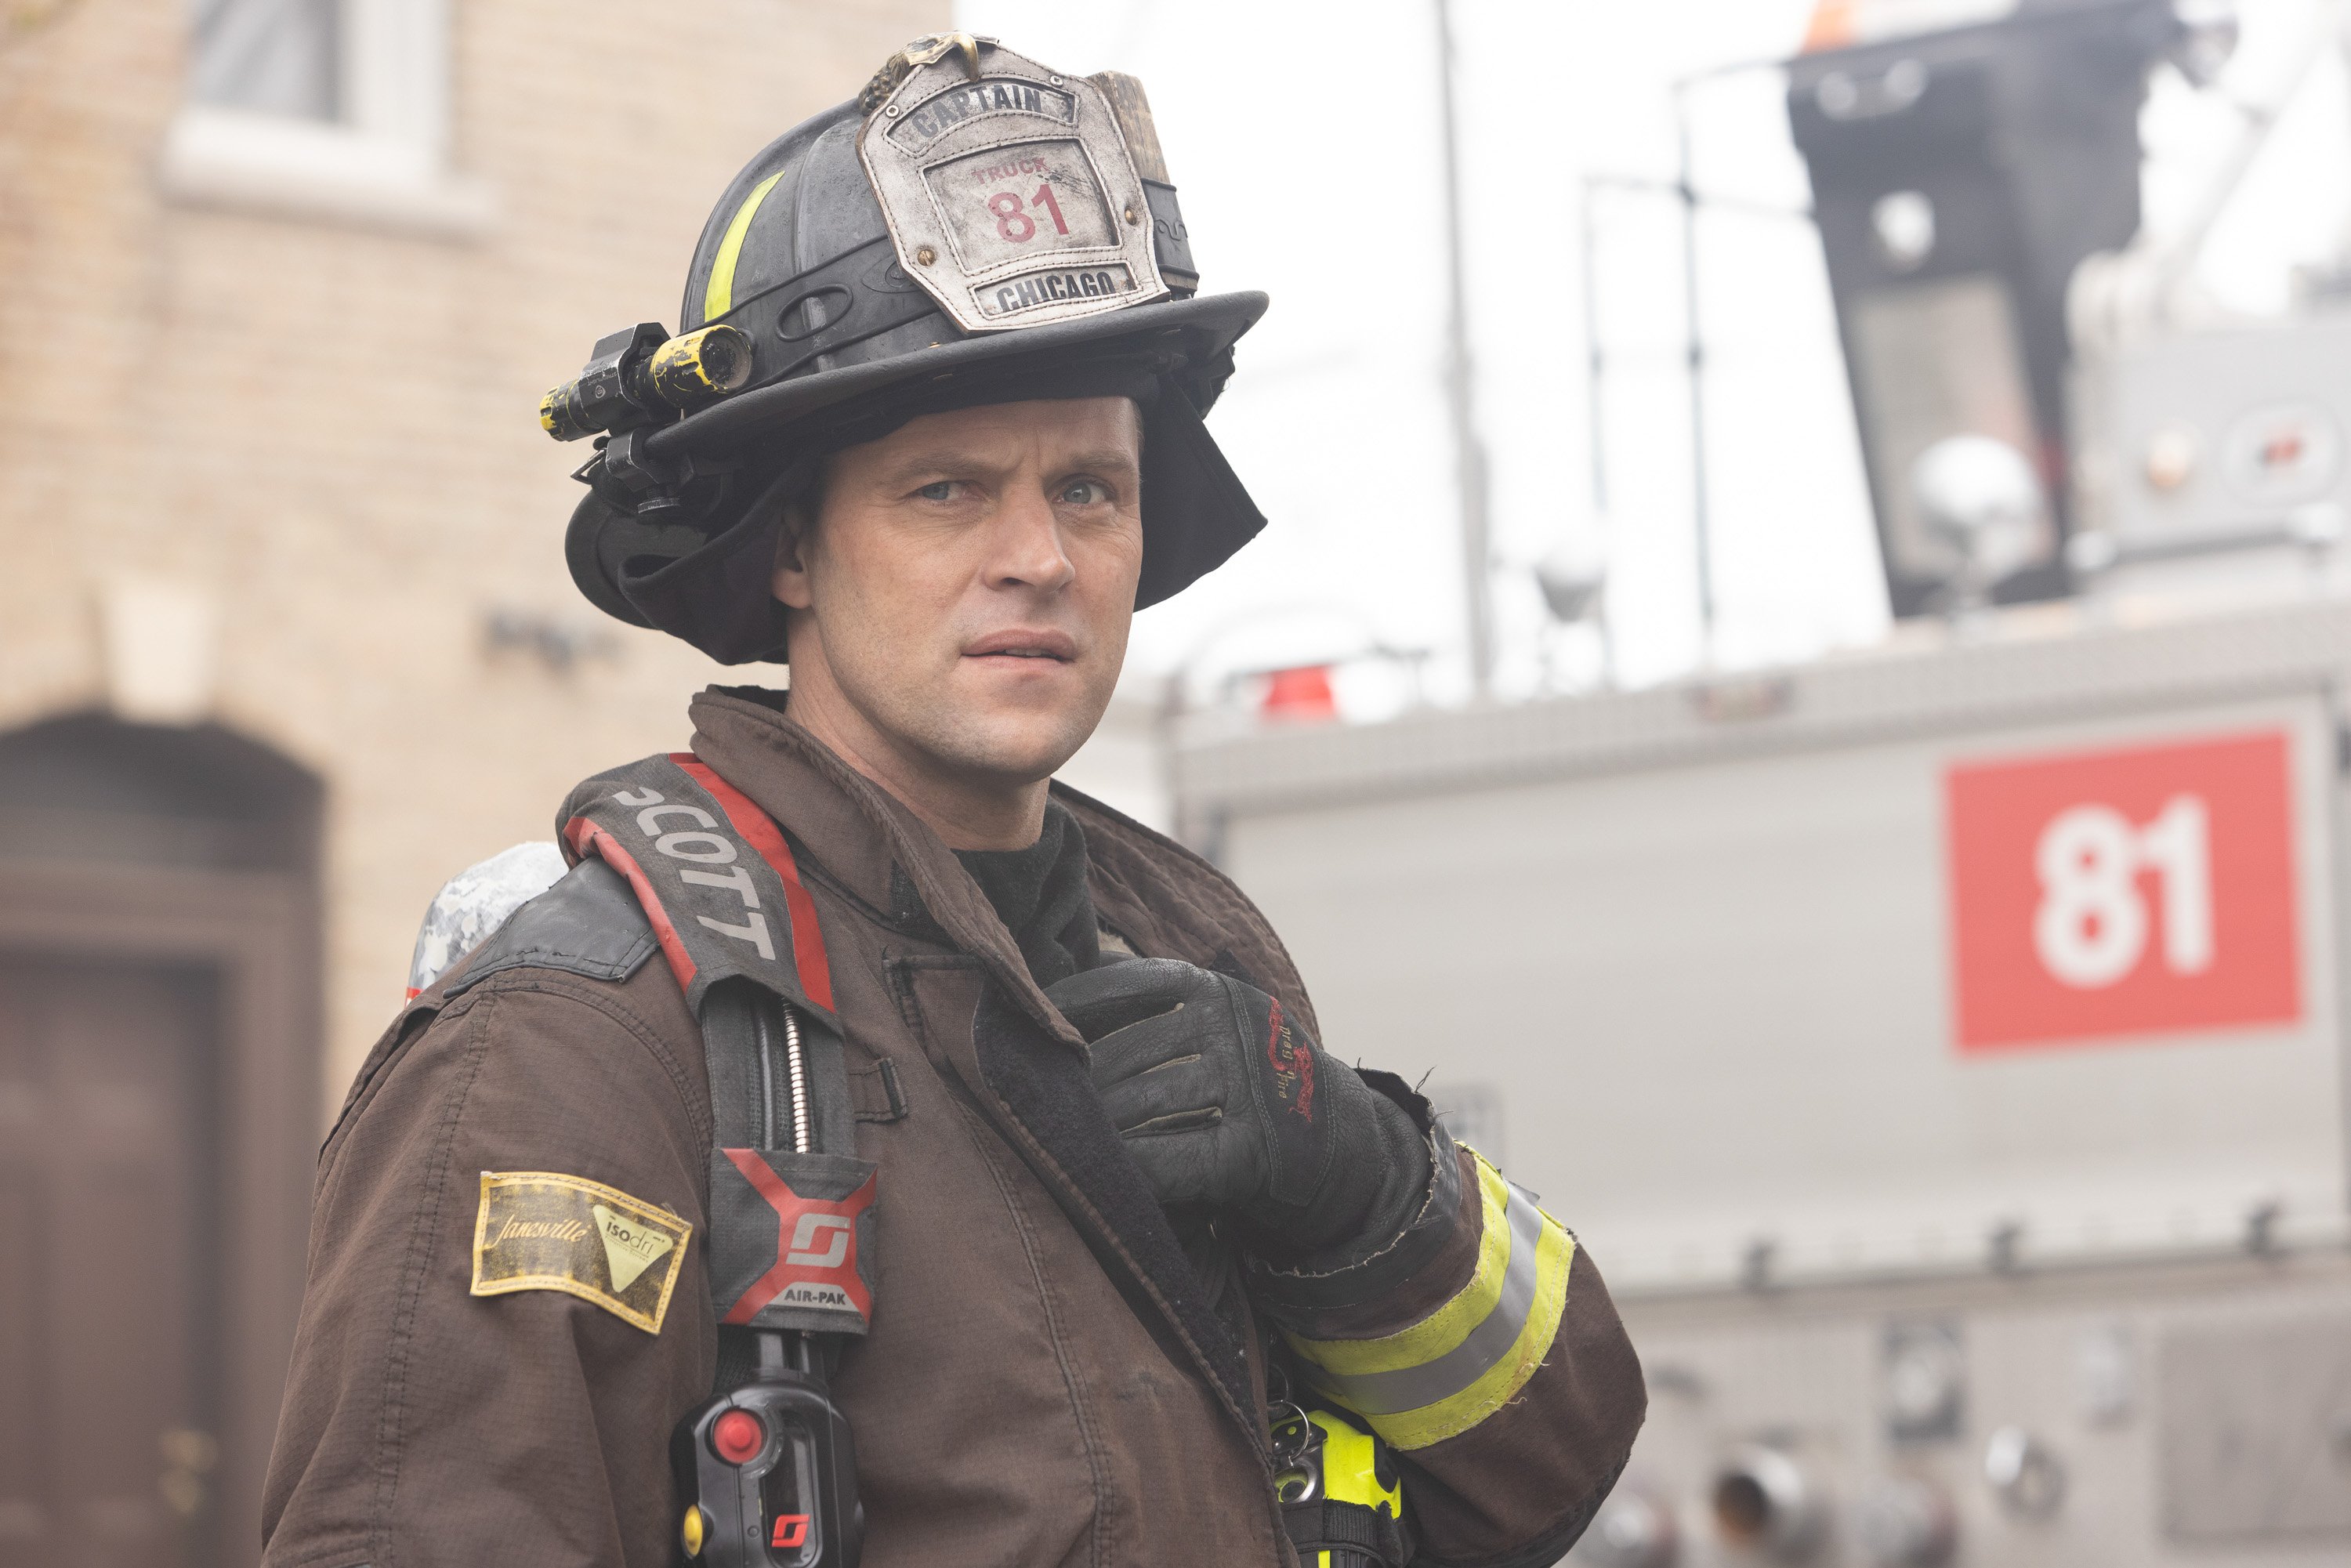 Jesse Spencer as Matthew Casey, dressed in his fire uniform.